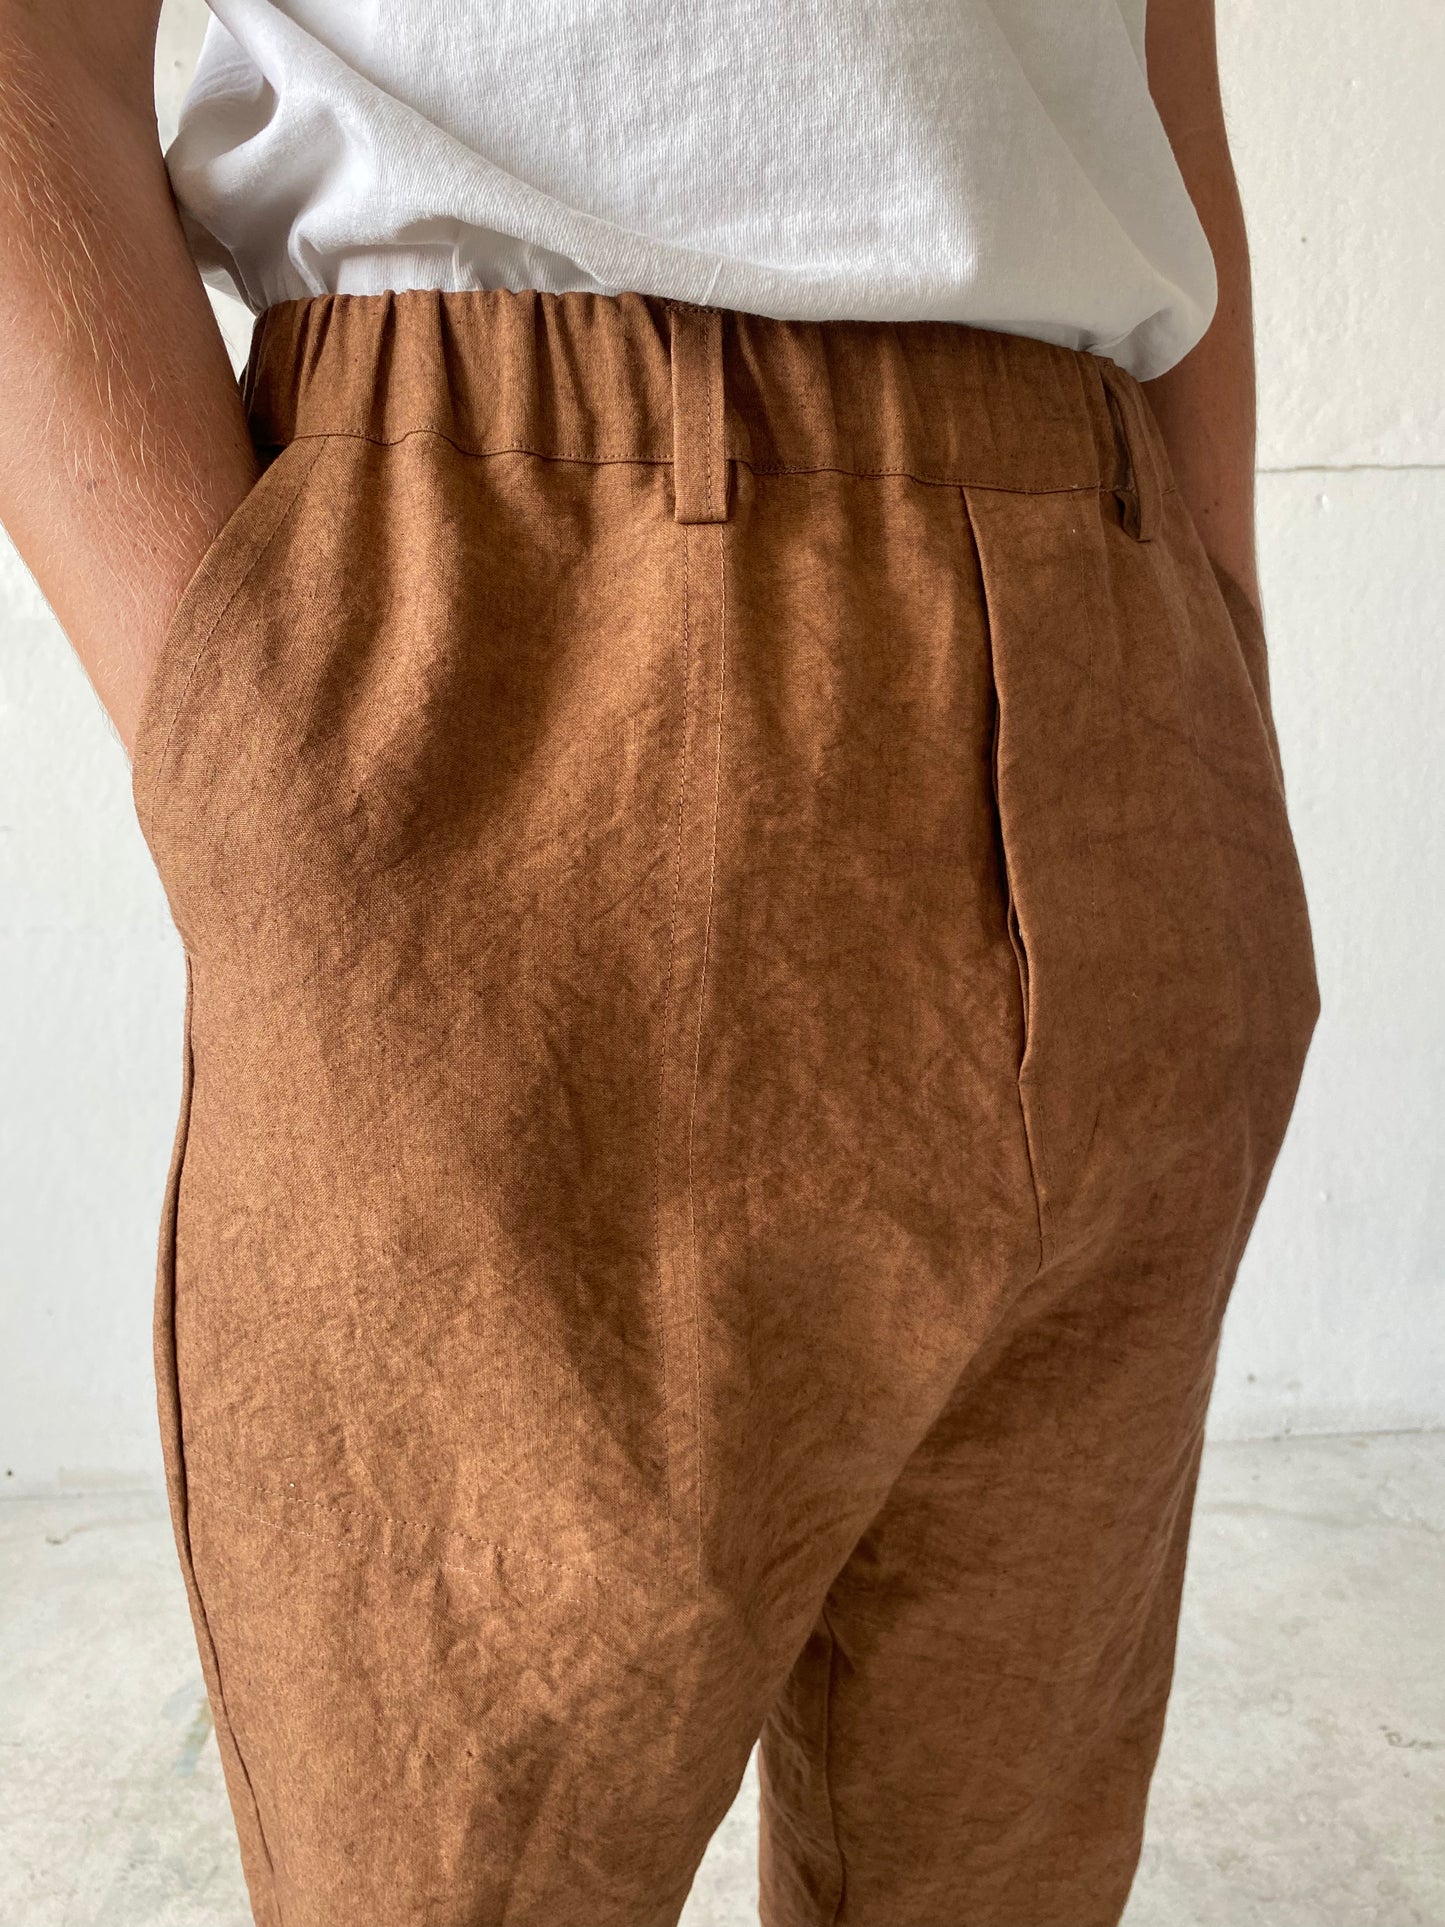 Work Pants in Persimmon Dyed Paper/Linen